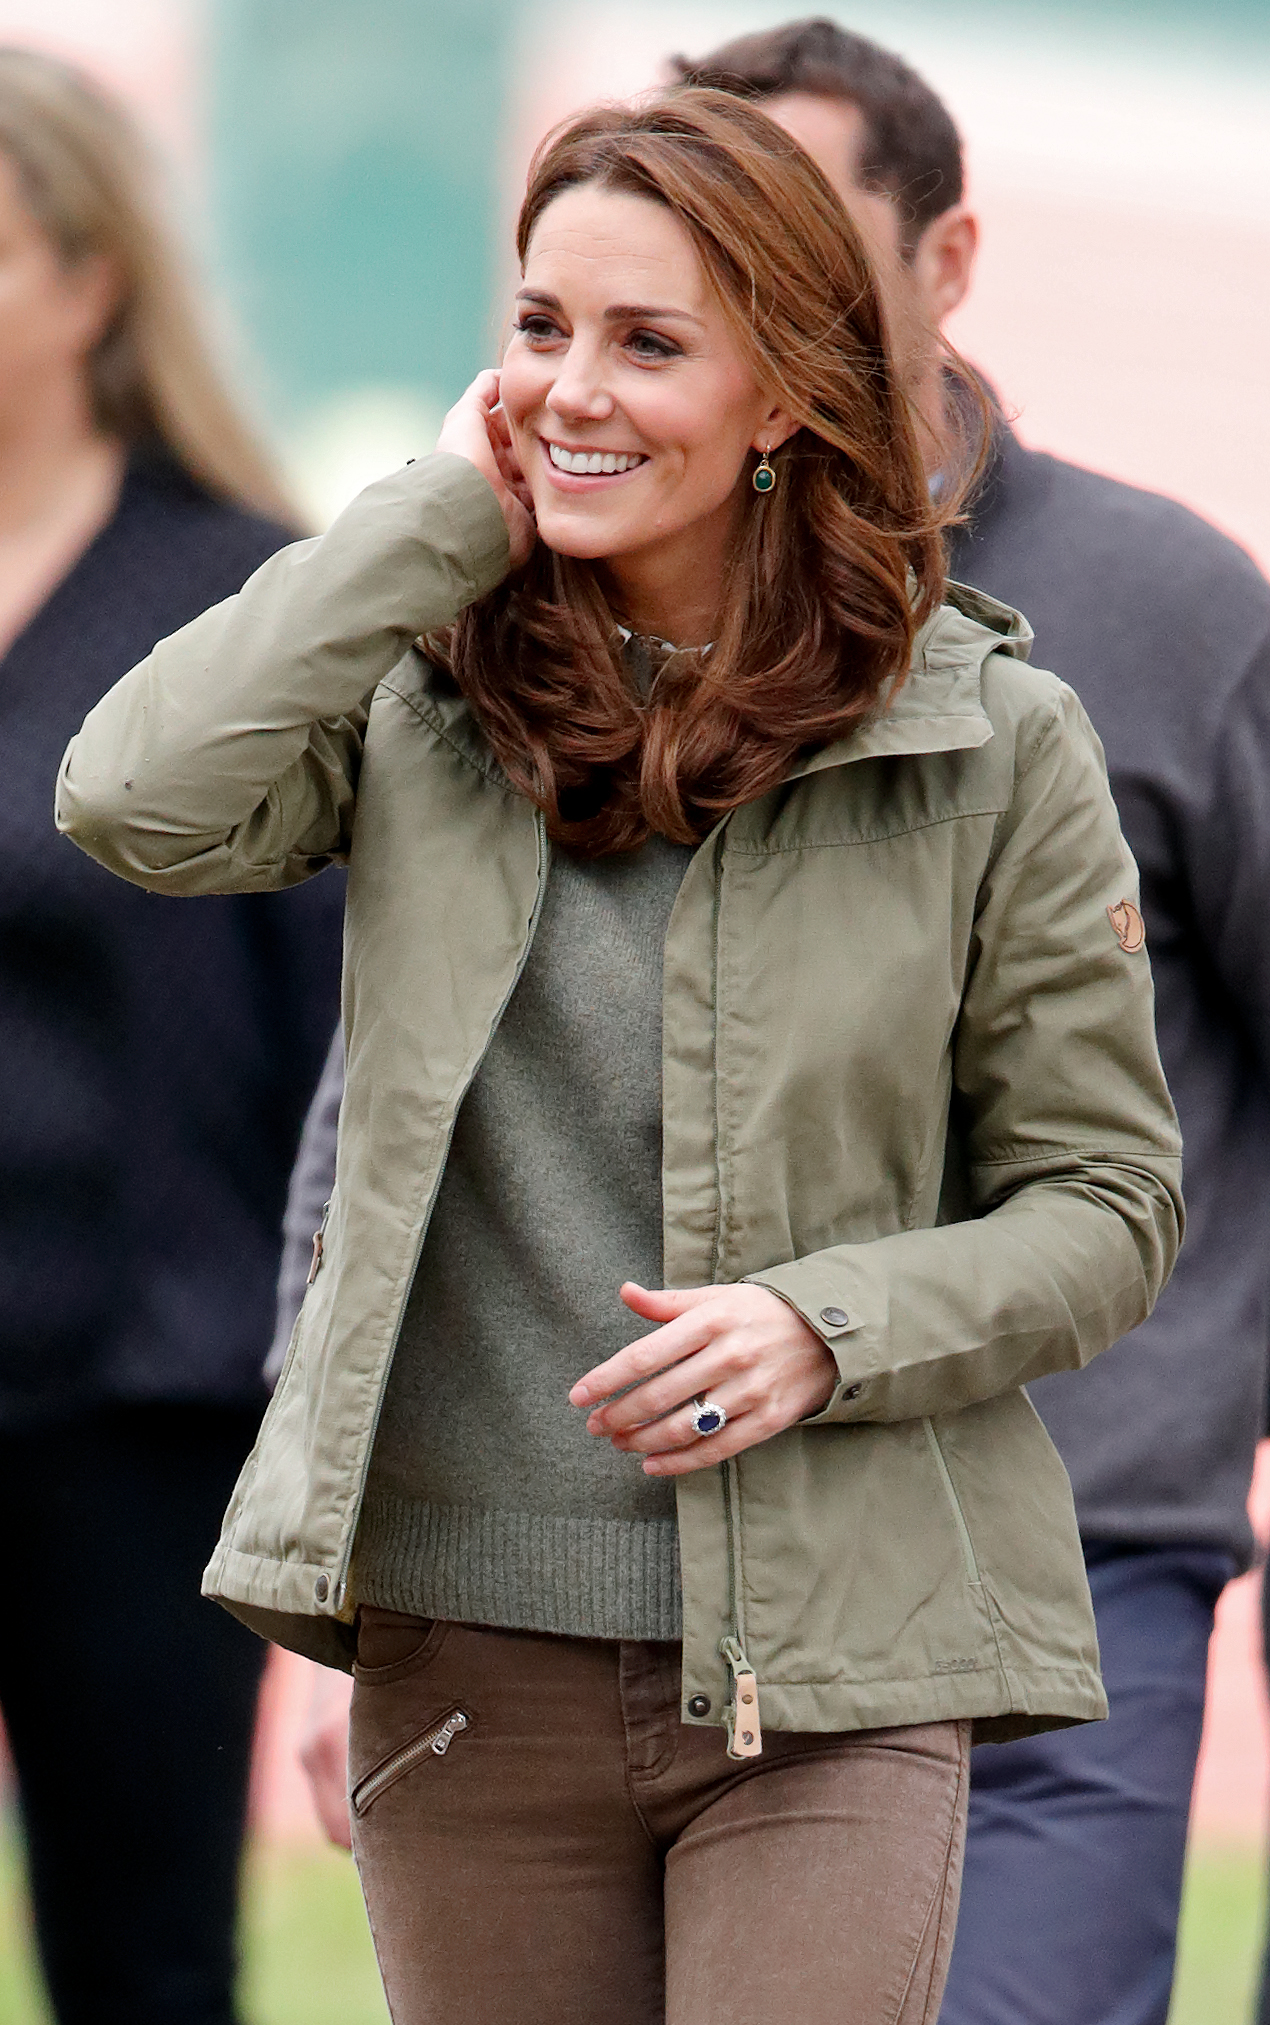 Kate Middleton steps out for the first time after maternity leave - and ...